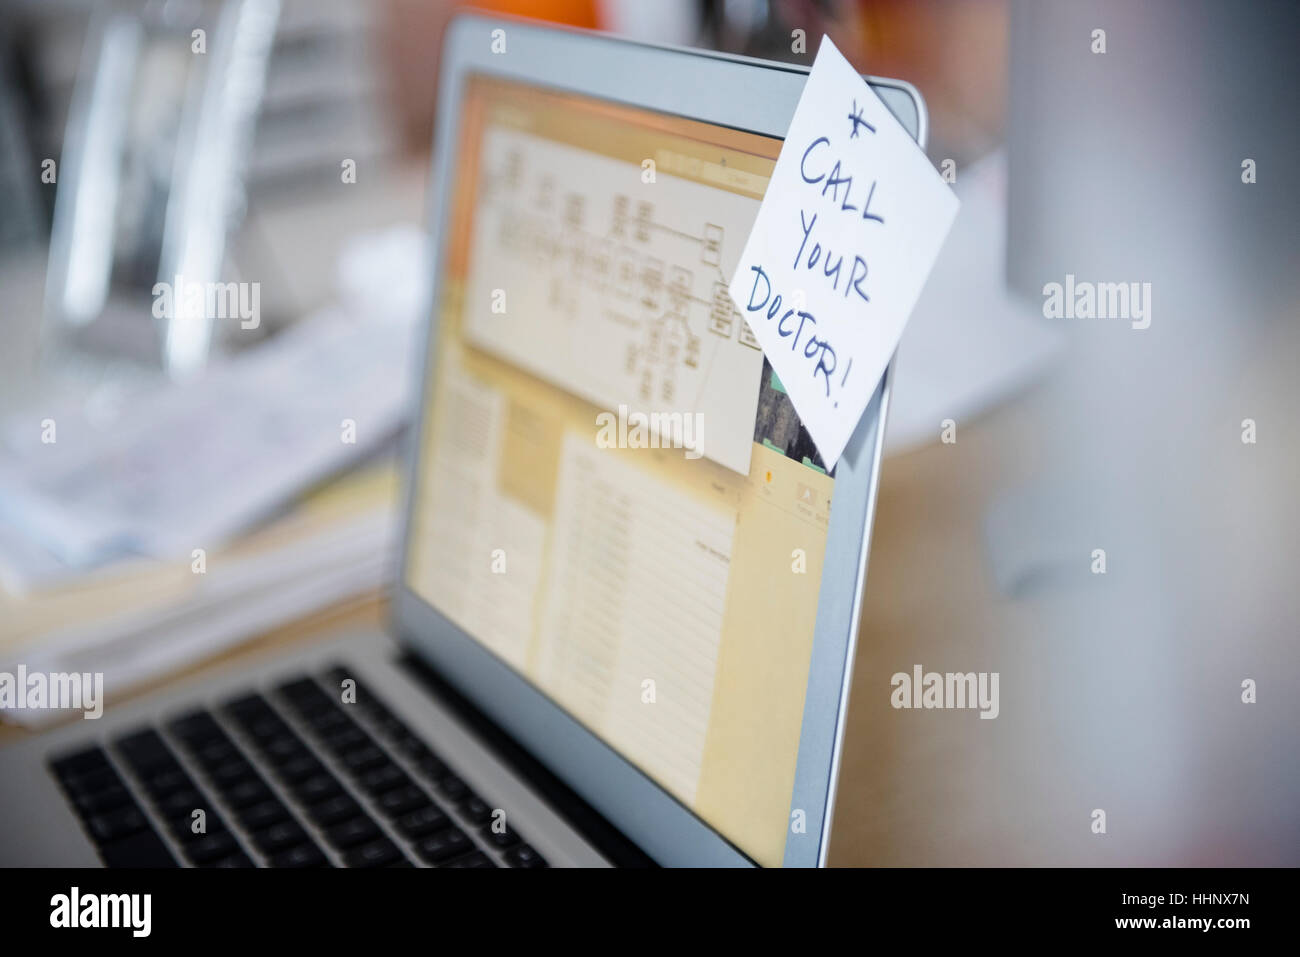 Reminder on adhesive note attached to laptop Stock Photo